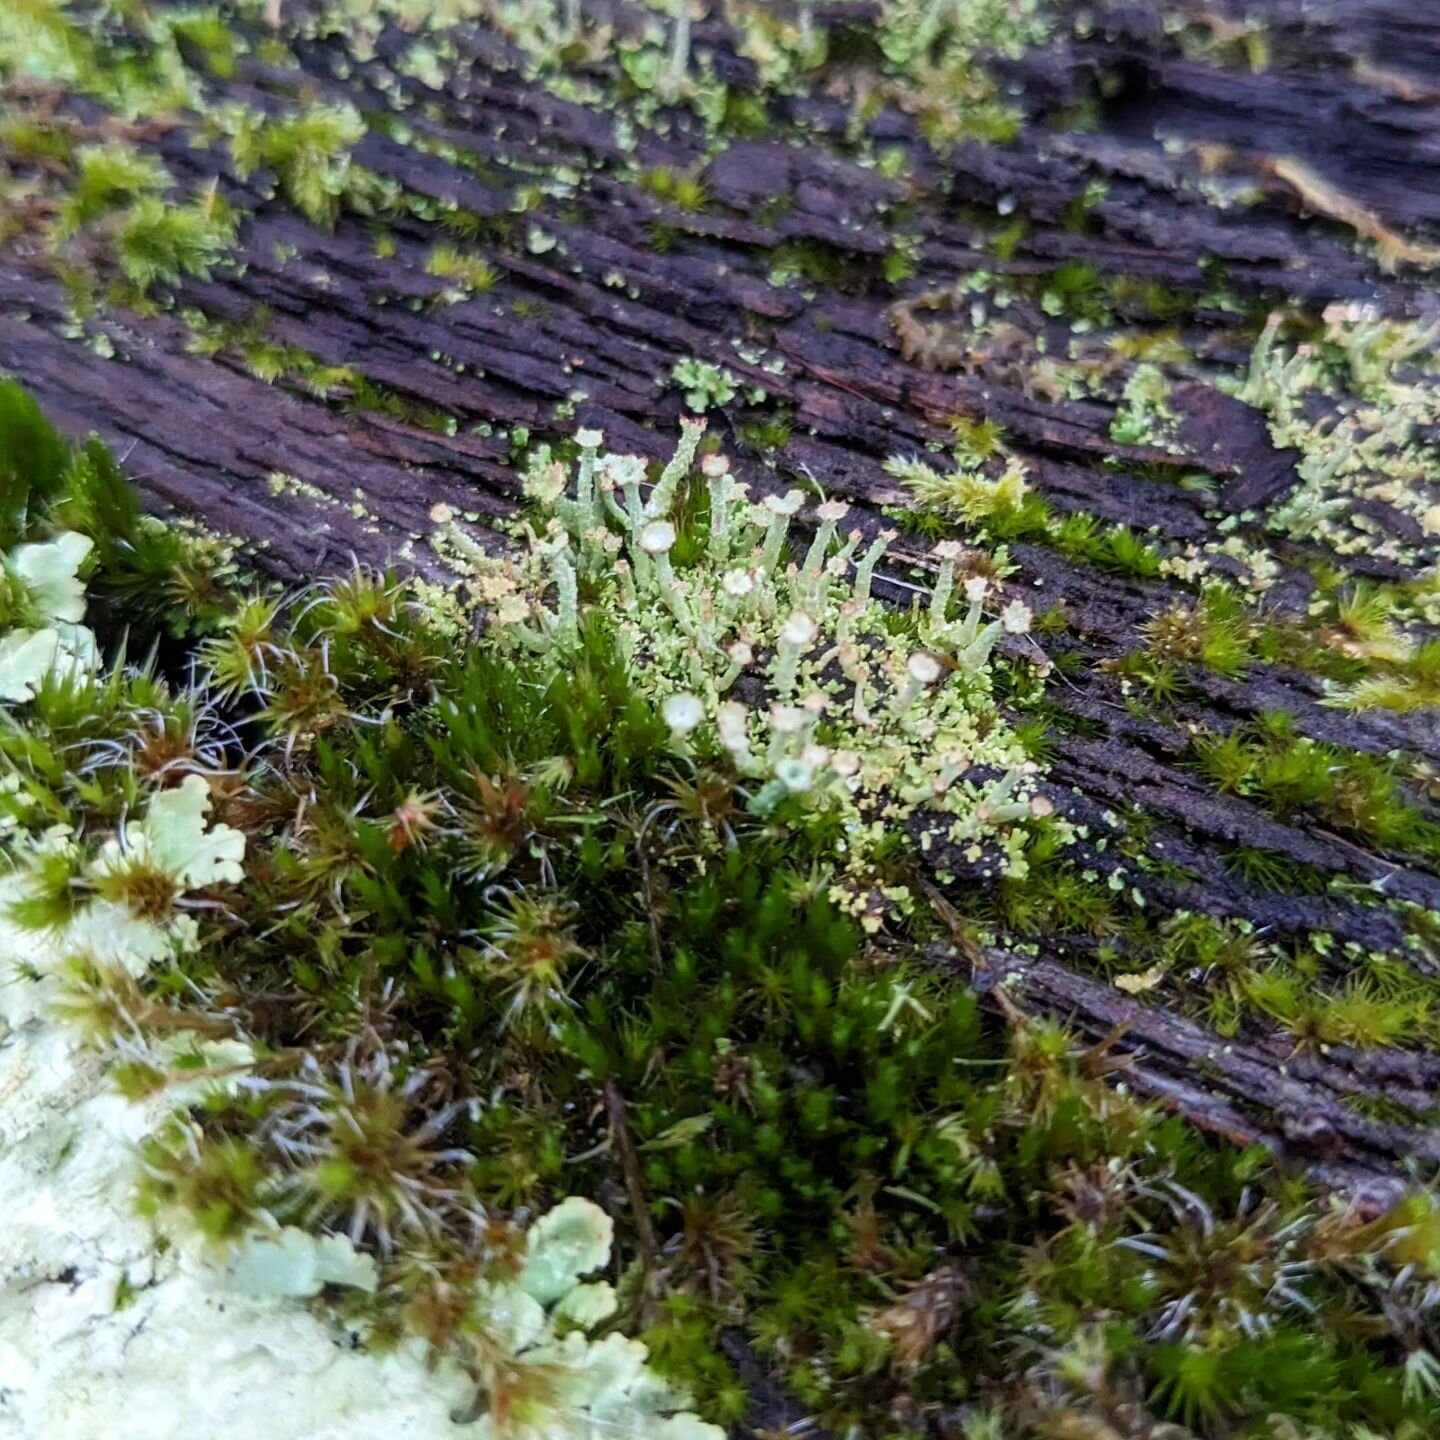 In honour of our (semi) (not really at all) recent episode about lichen, we're bringing you this picture of some GREAT lil lichen and moss we found at the Eden Project!

If you haven't already listened to the episode, maybe this is your sign that you